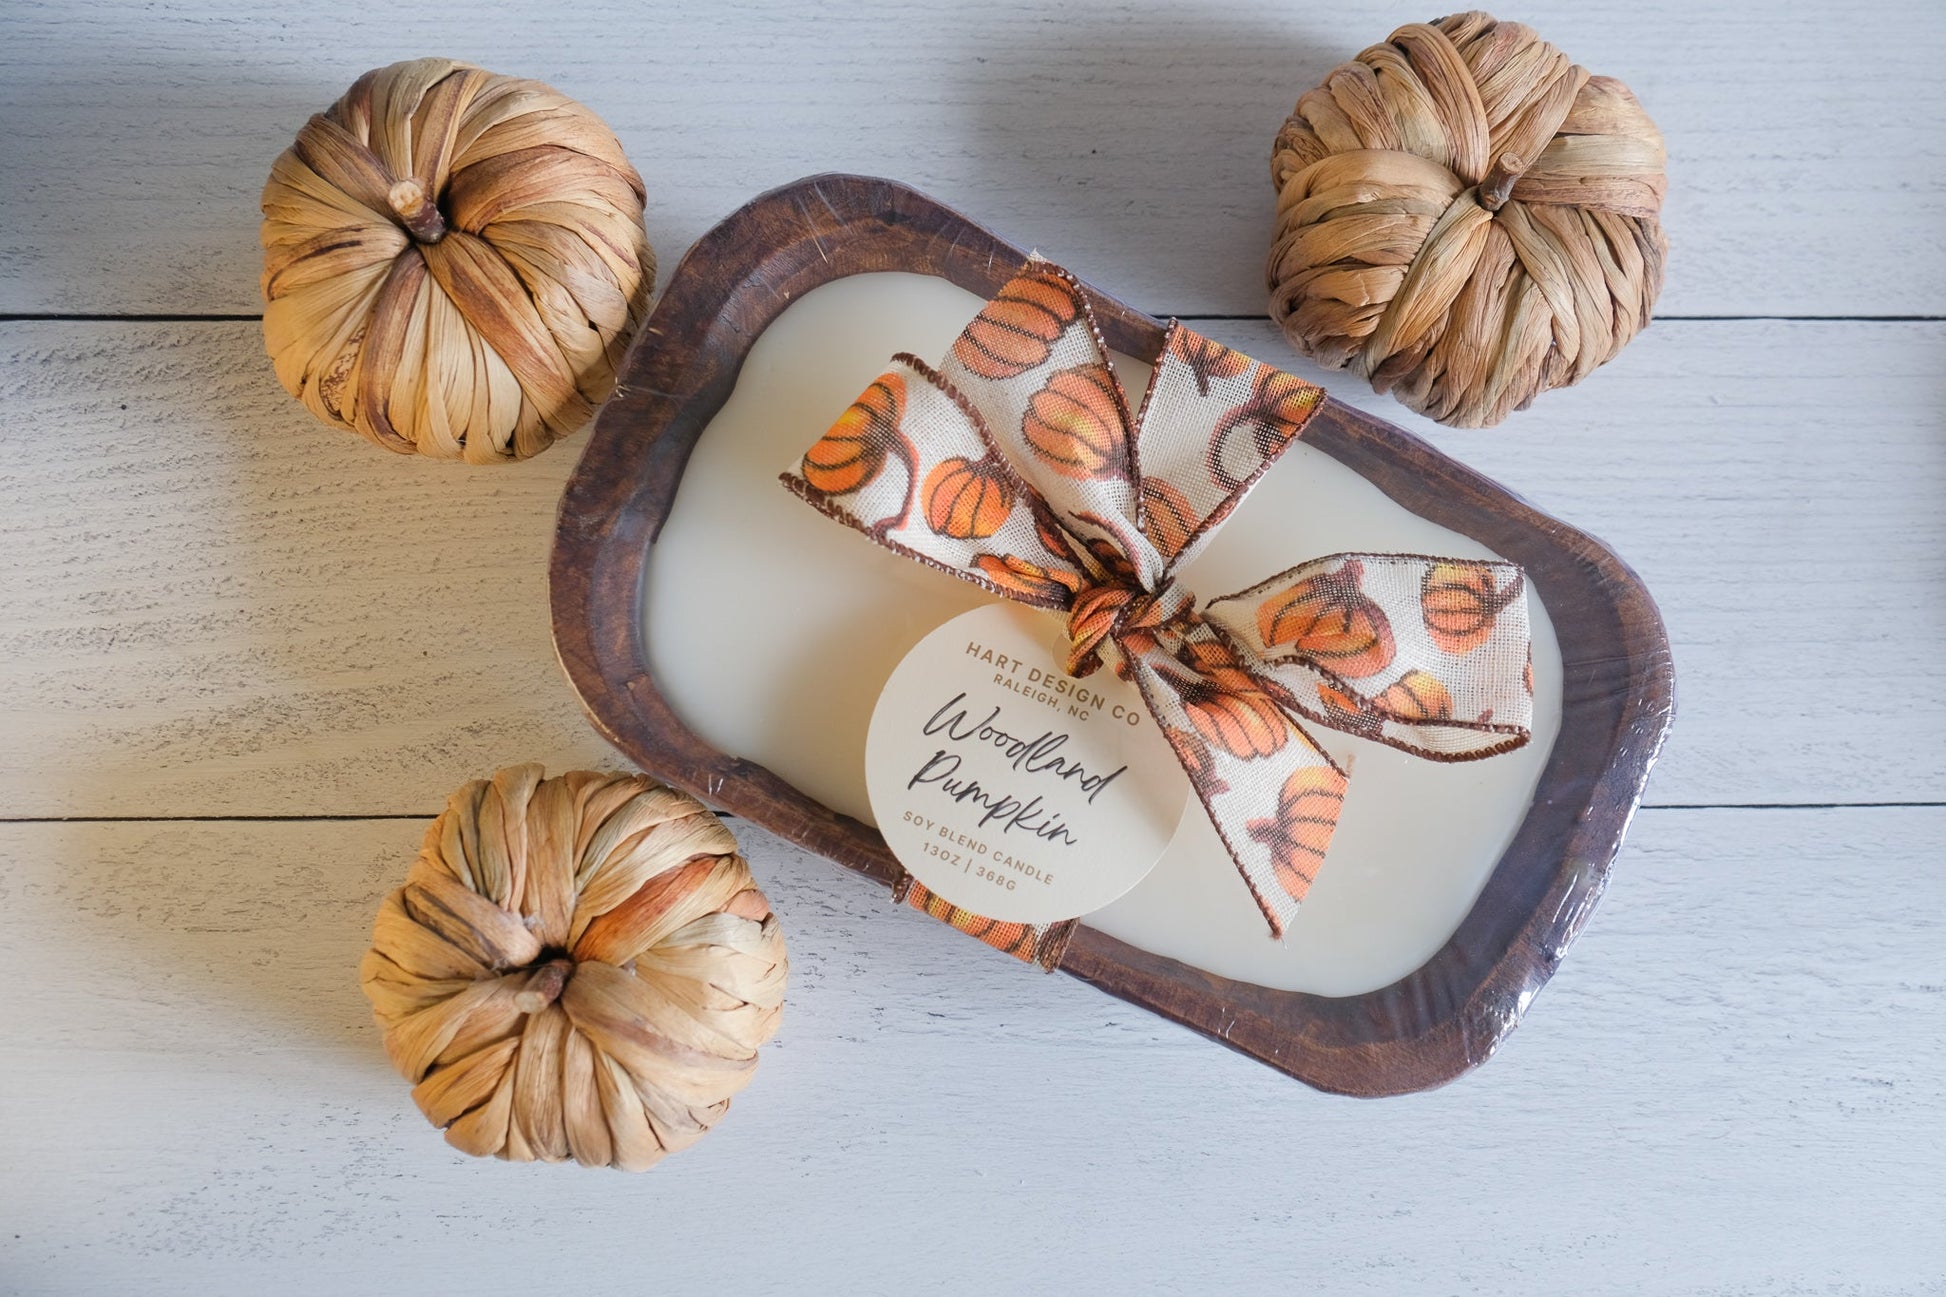 Woodland Pumpkin Hand Poured Candle.